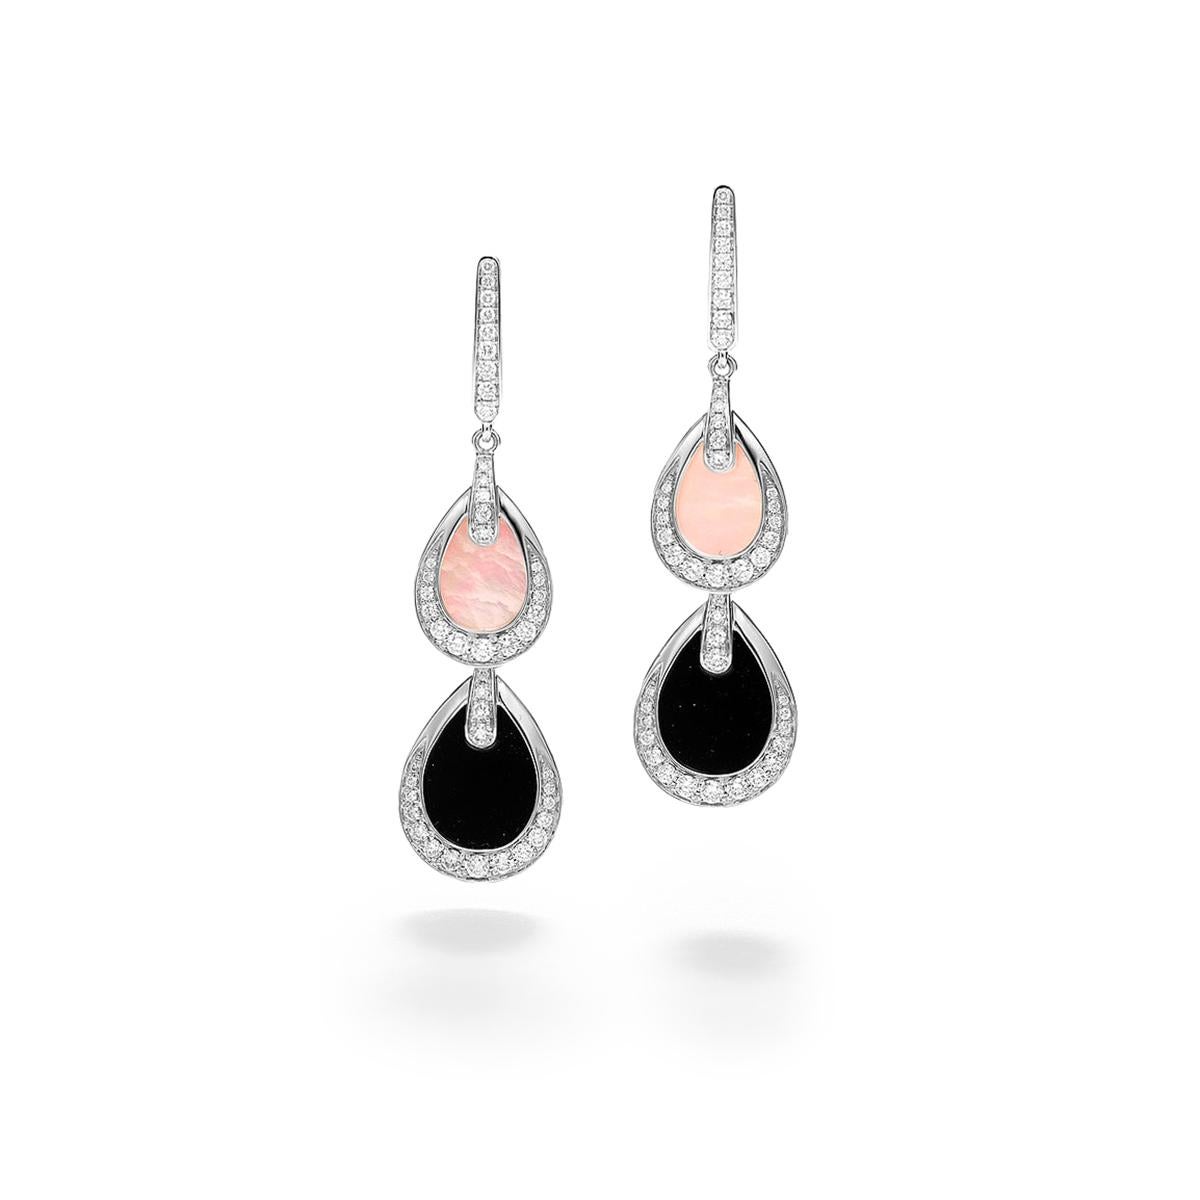 Earrings in 18kt white gold set with 92 diamonds 1.07 cts, 2 onyx 2.65 cts and 2 mother-of-pearl 2.01 cts             